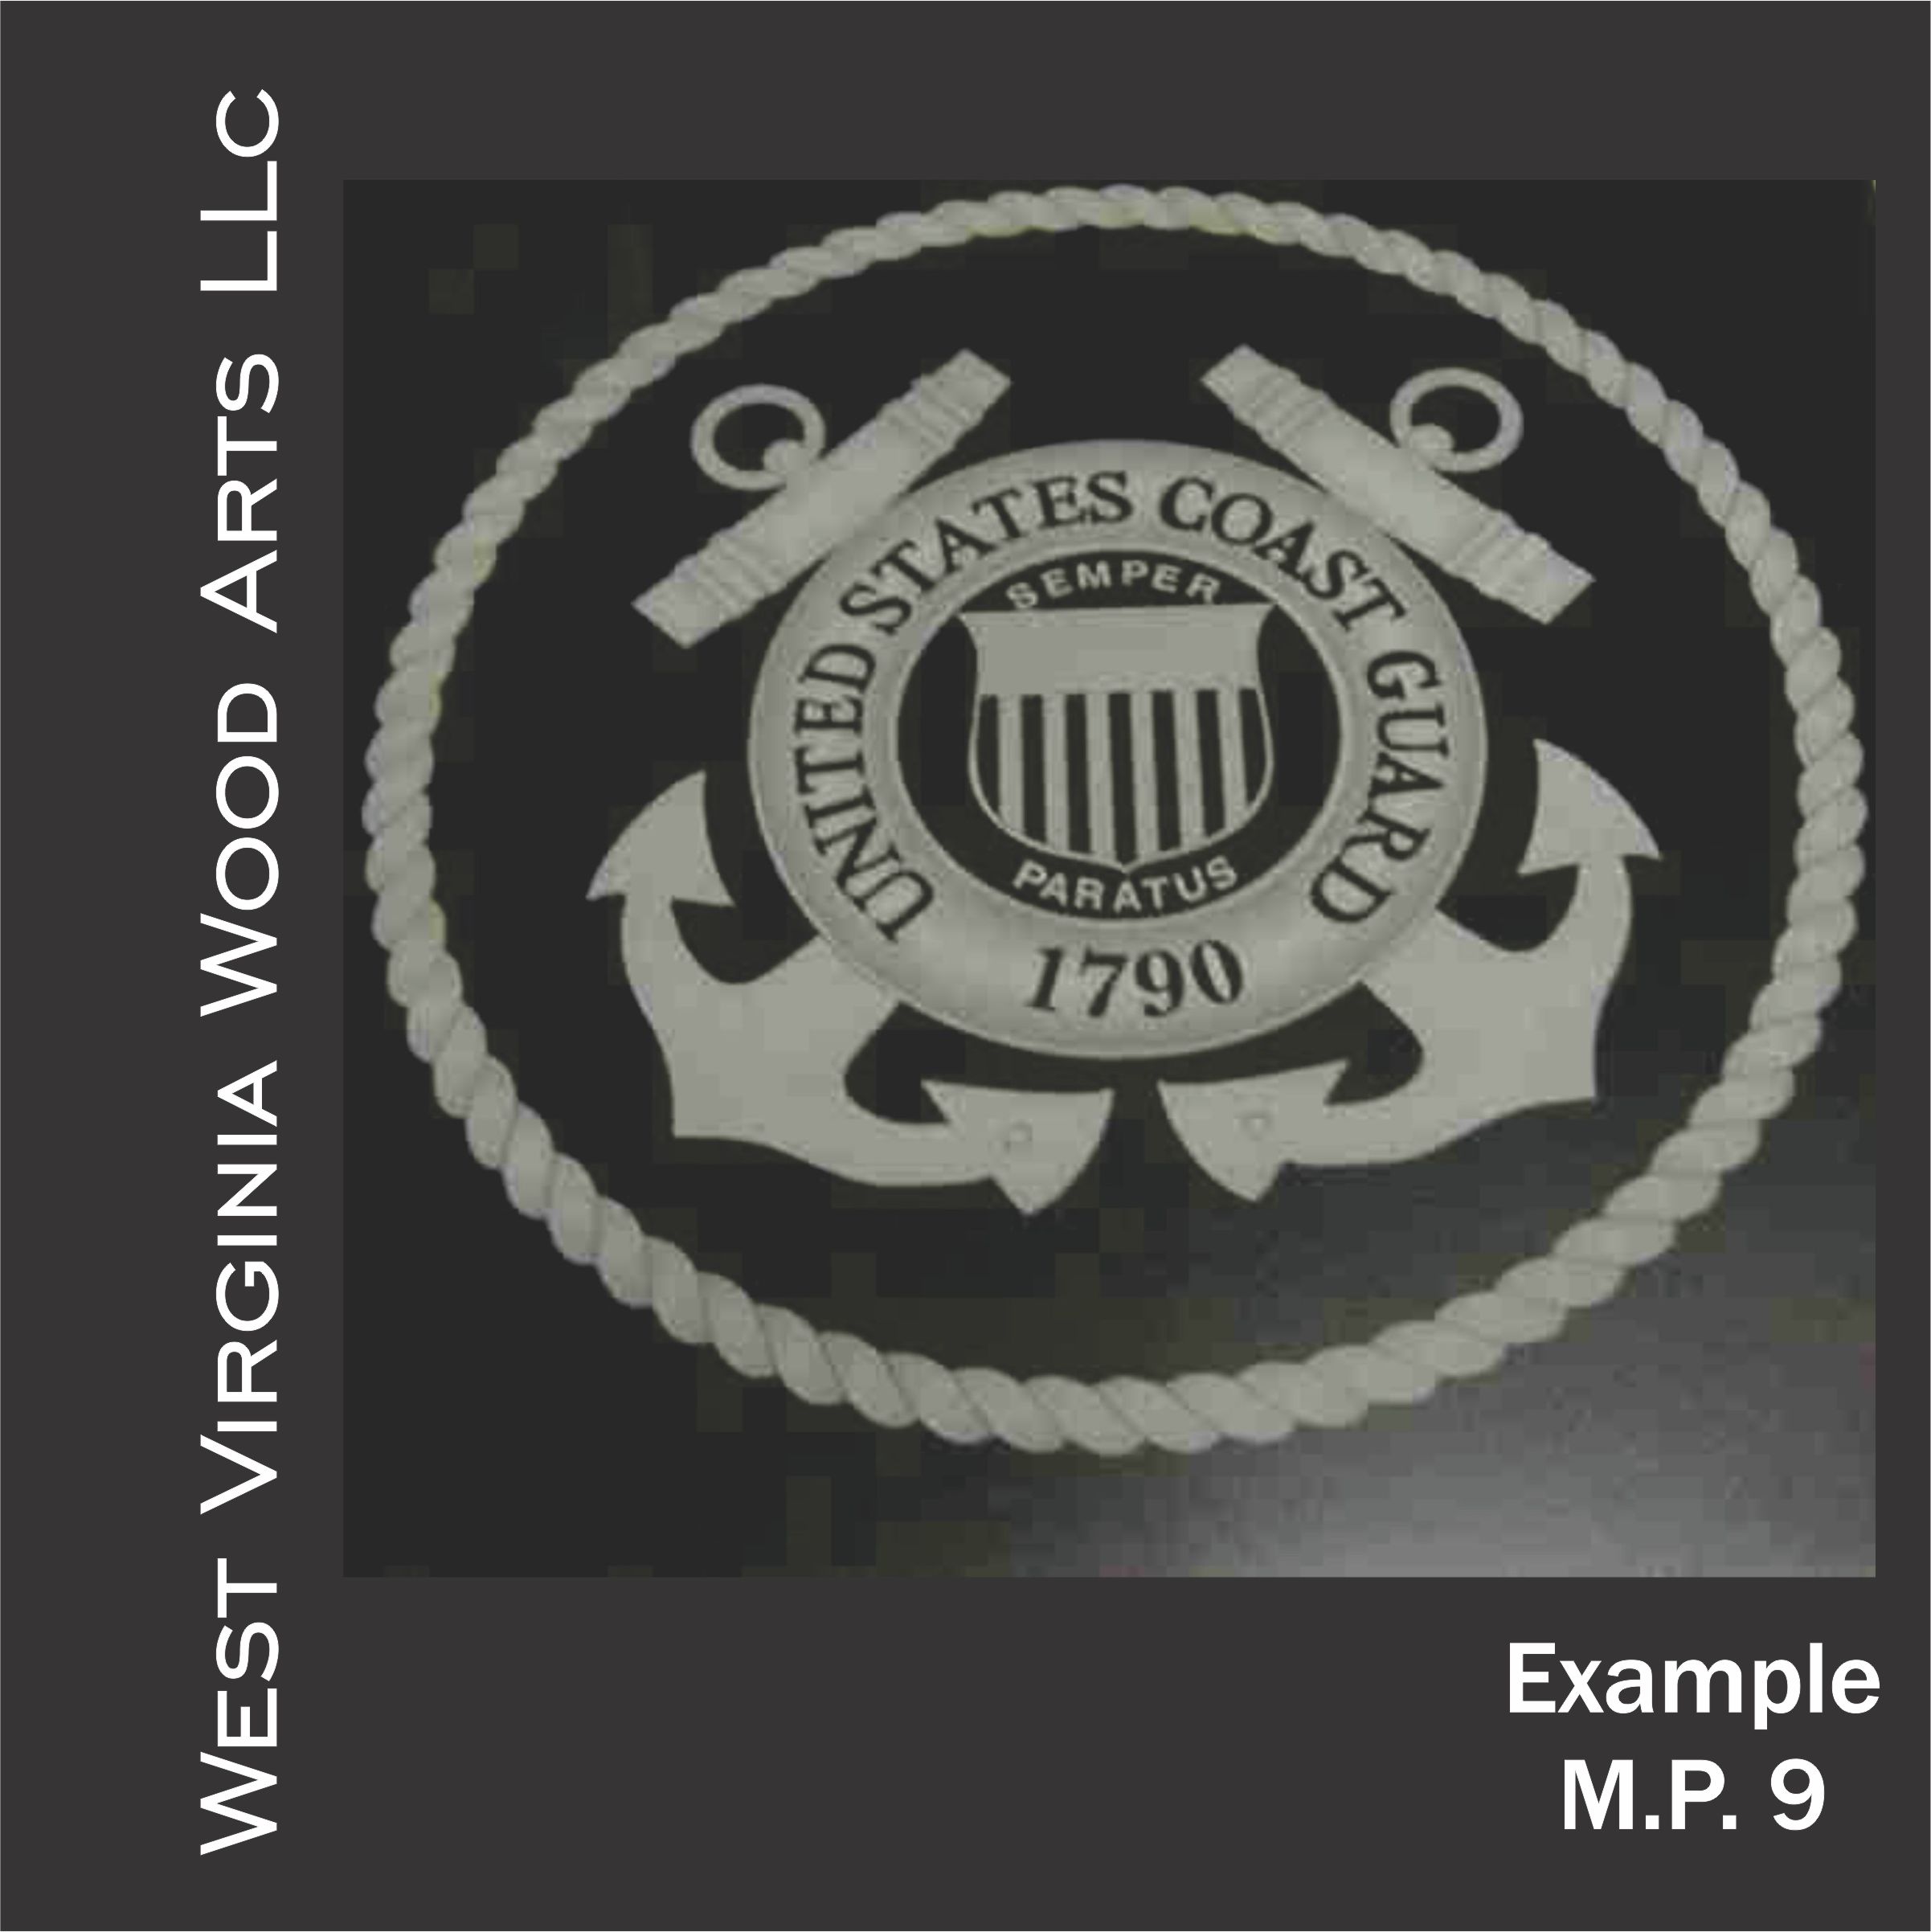 Coast Guard Graphic And Rope Design Engraved Into Large Marble Square